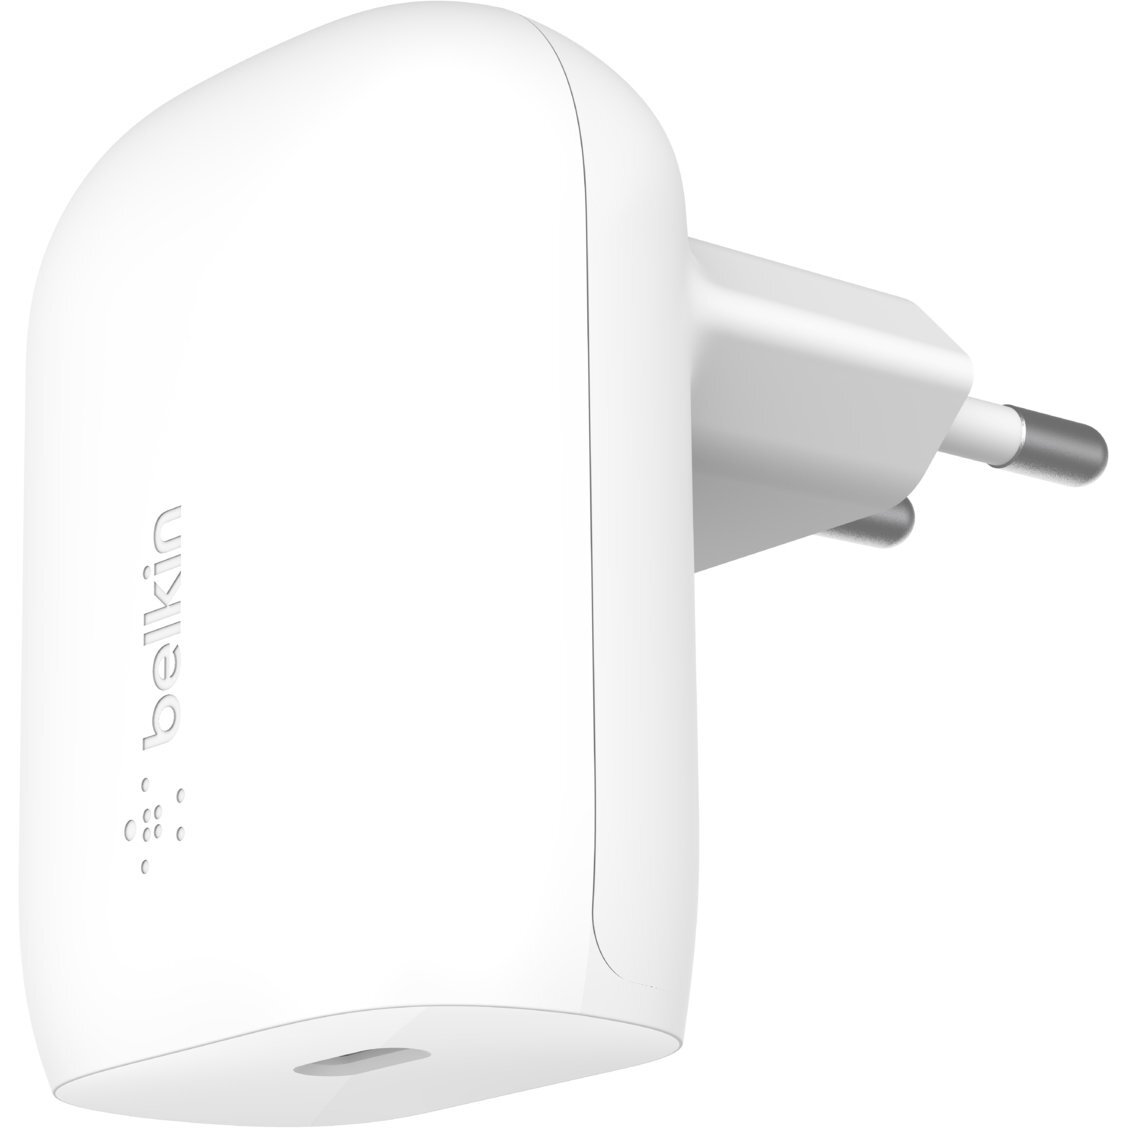 Сетевое ЗУ Belkin Home Charger 30W PD PPS USB-С (WCA005VFWH) фото 1